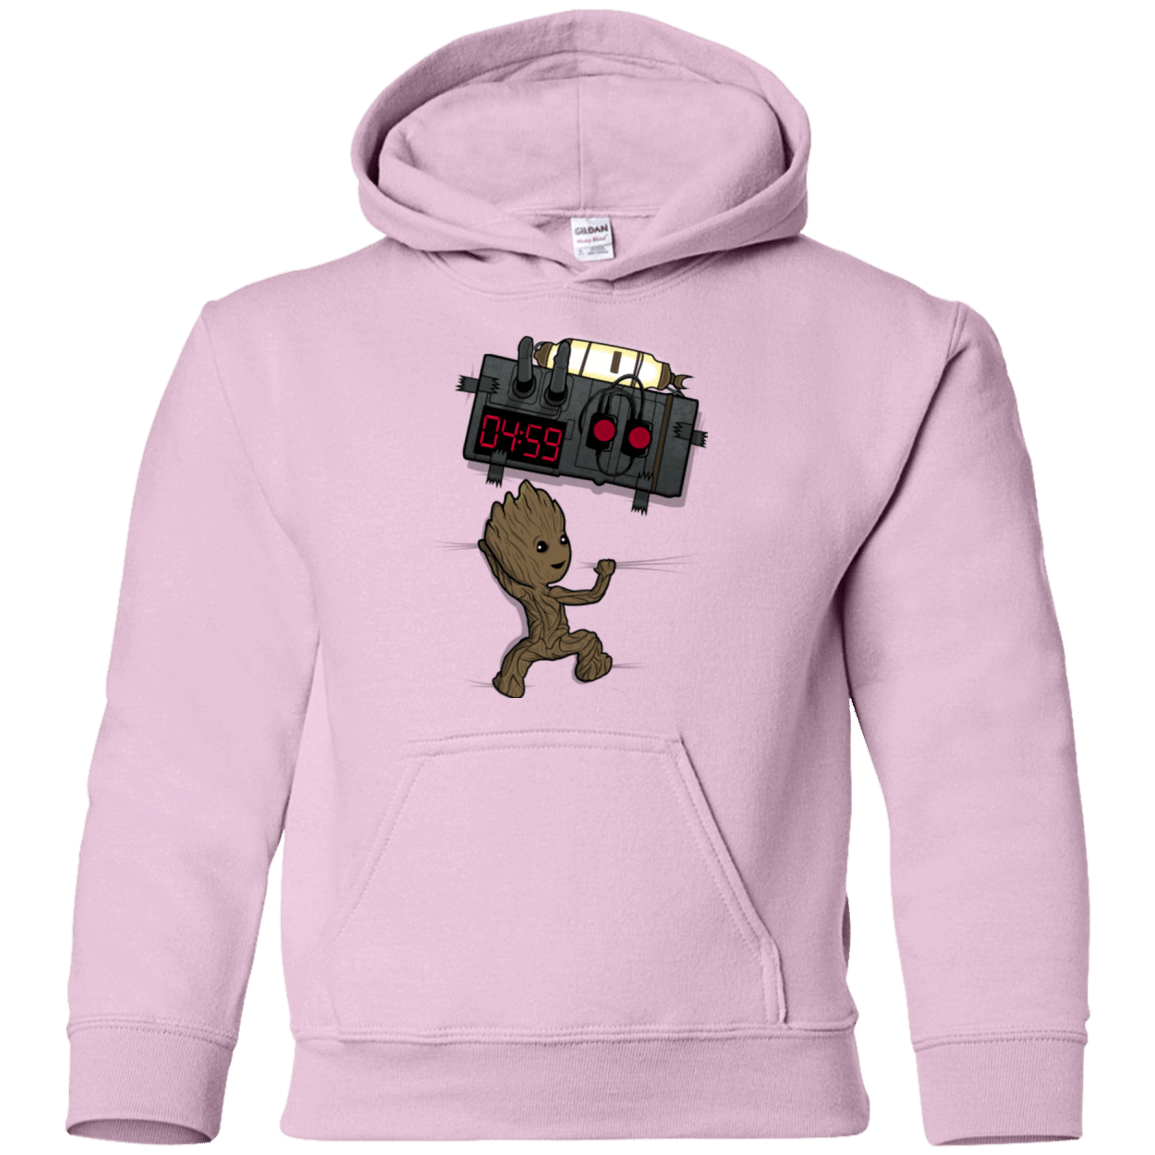 Sweatshirts Light Pink / YS Bomb In Your Chest! Youth Hoodie